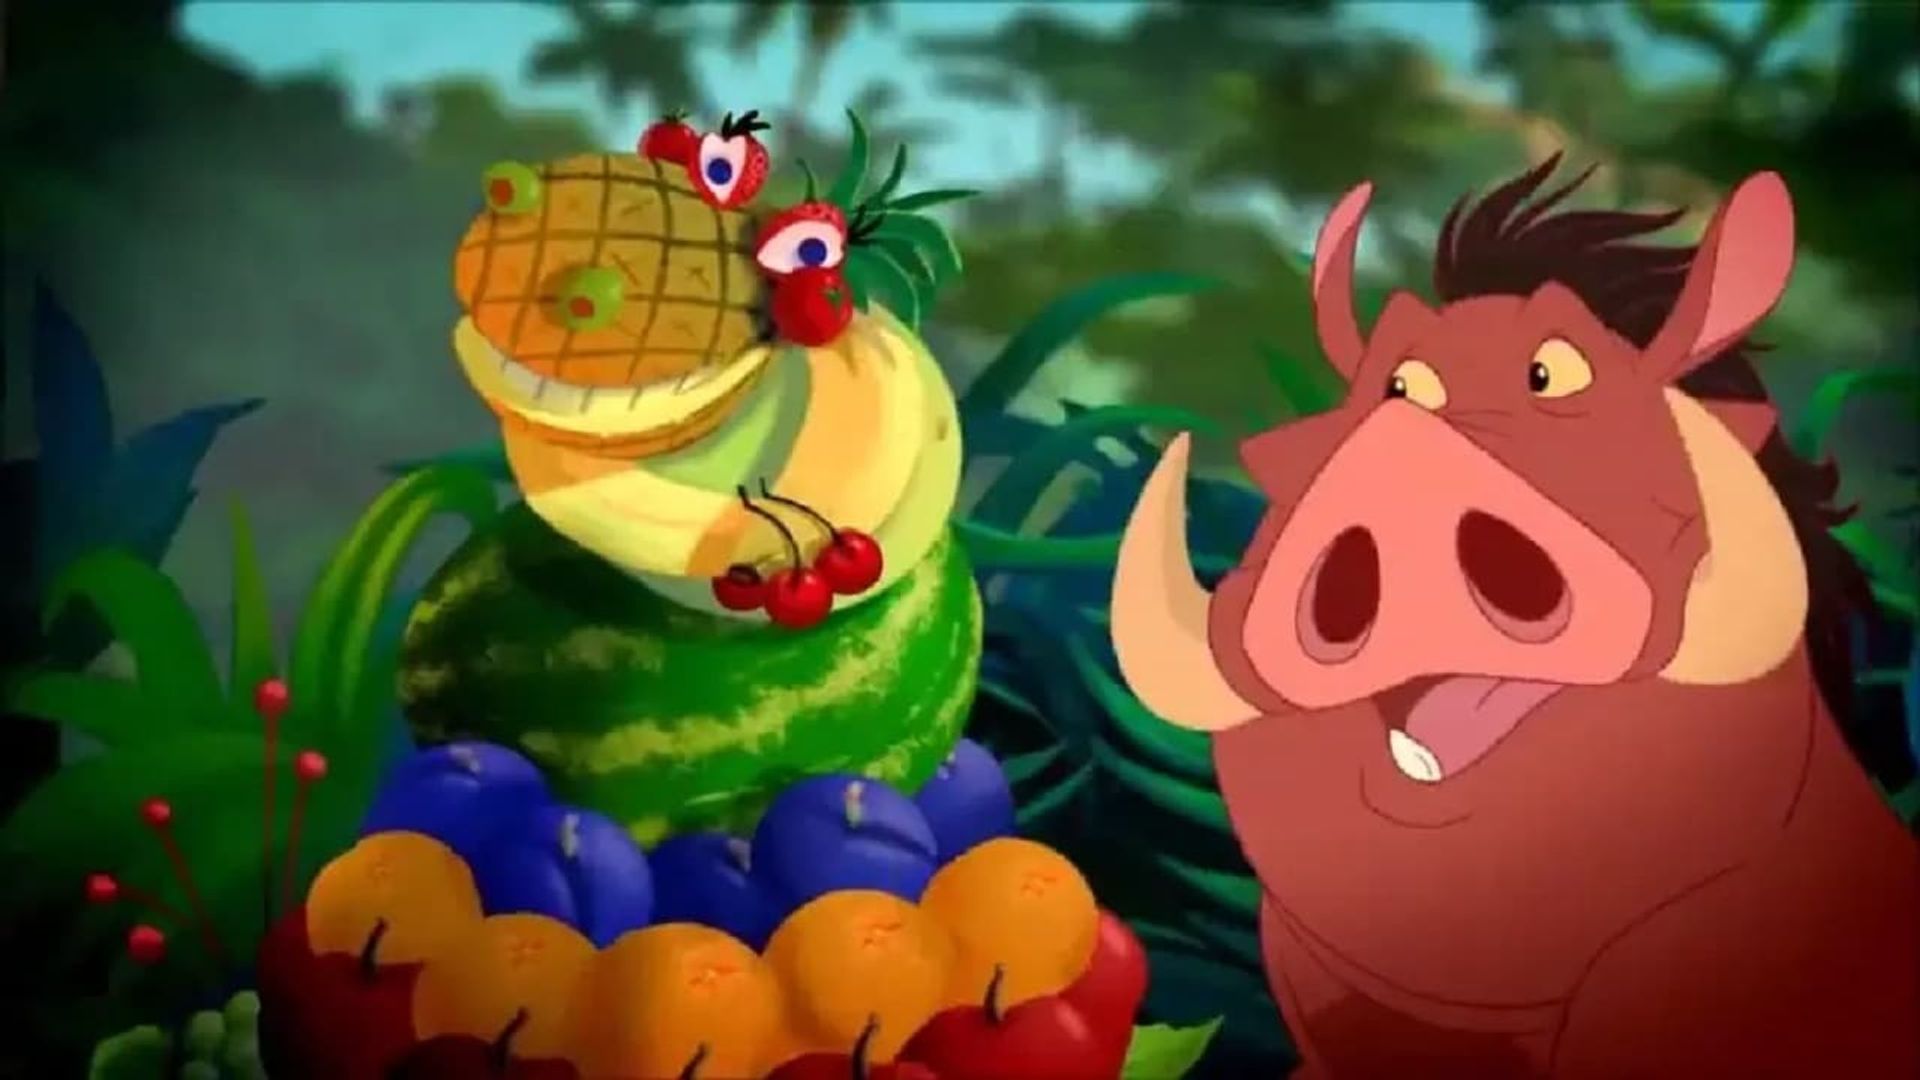 Wild About Safety: Timon and Pumbaa Safety Smart Honest & Real! background